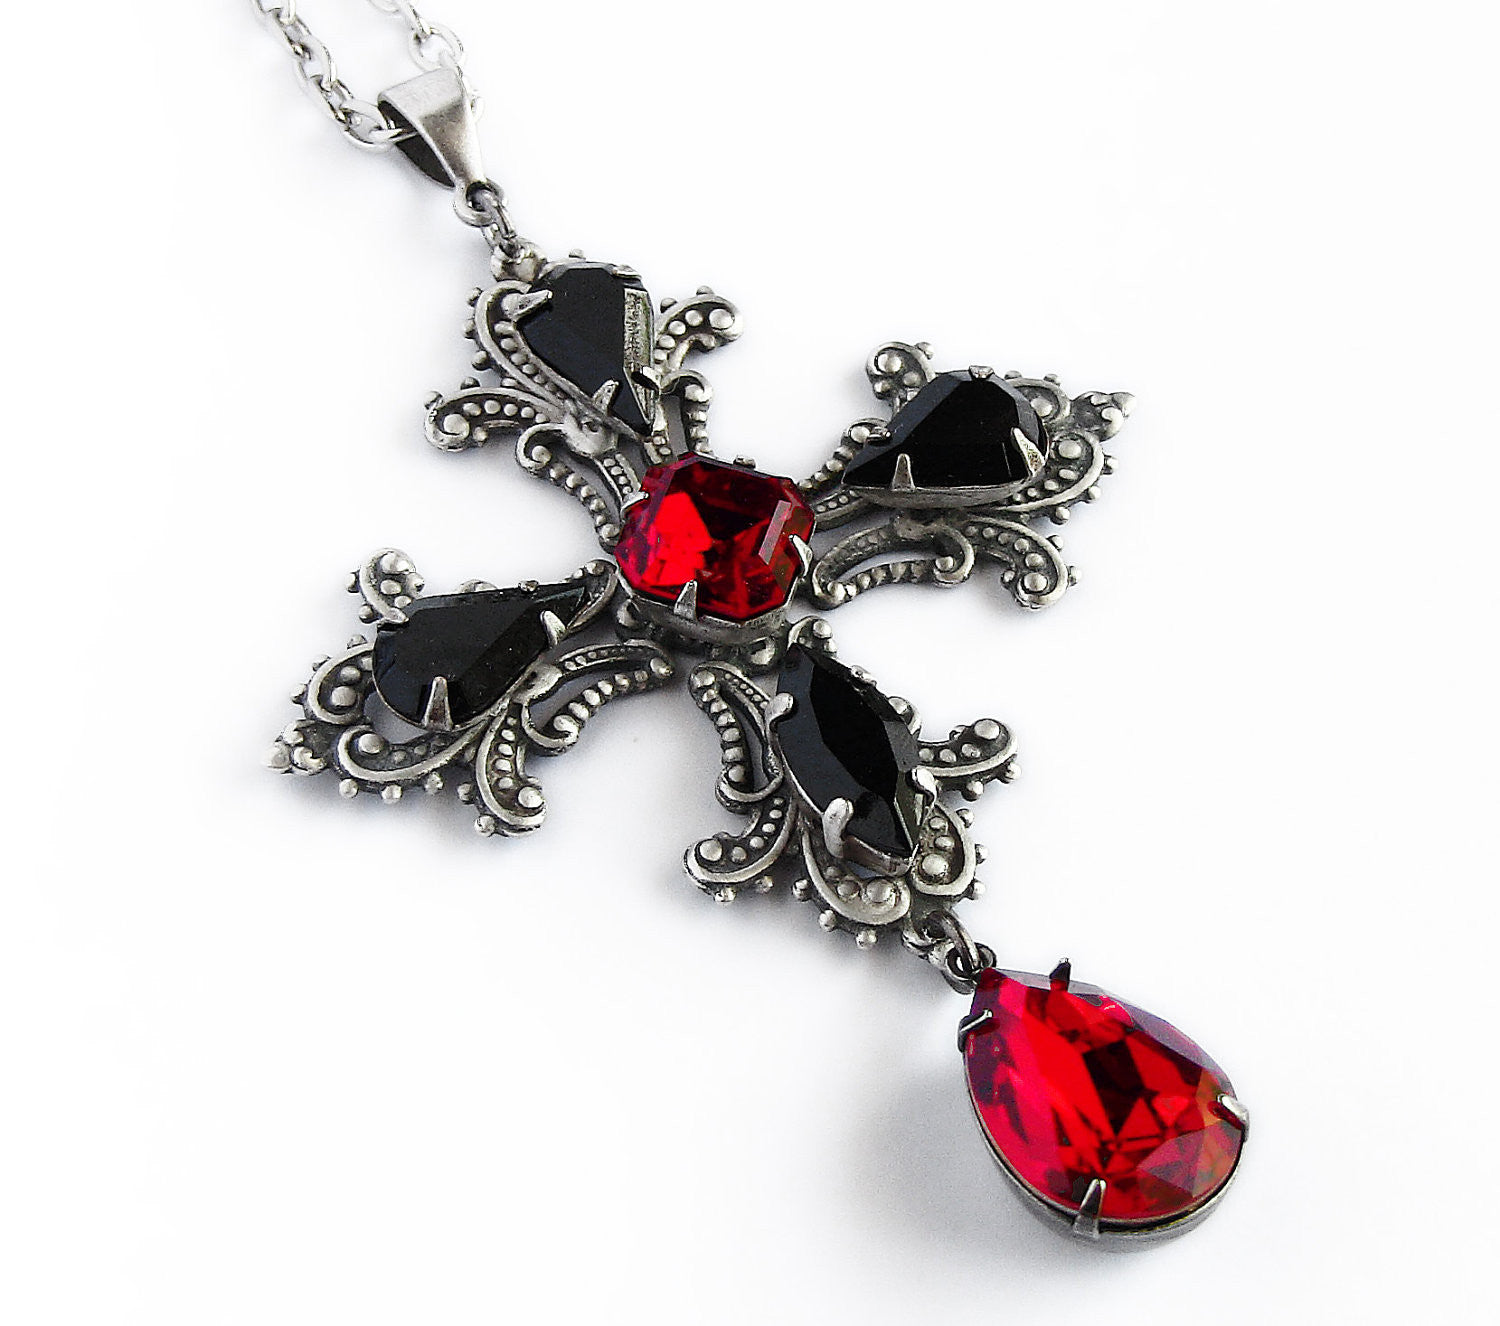 Black And Red Dangles Necklace And Earrings – Erica's Creative Cavalcade